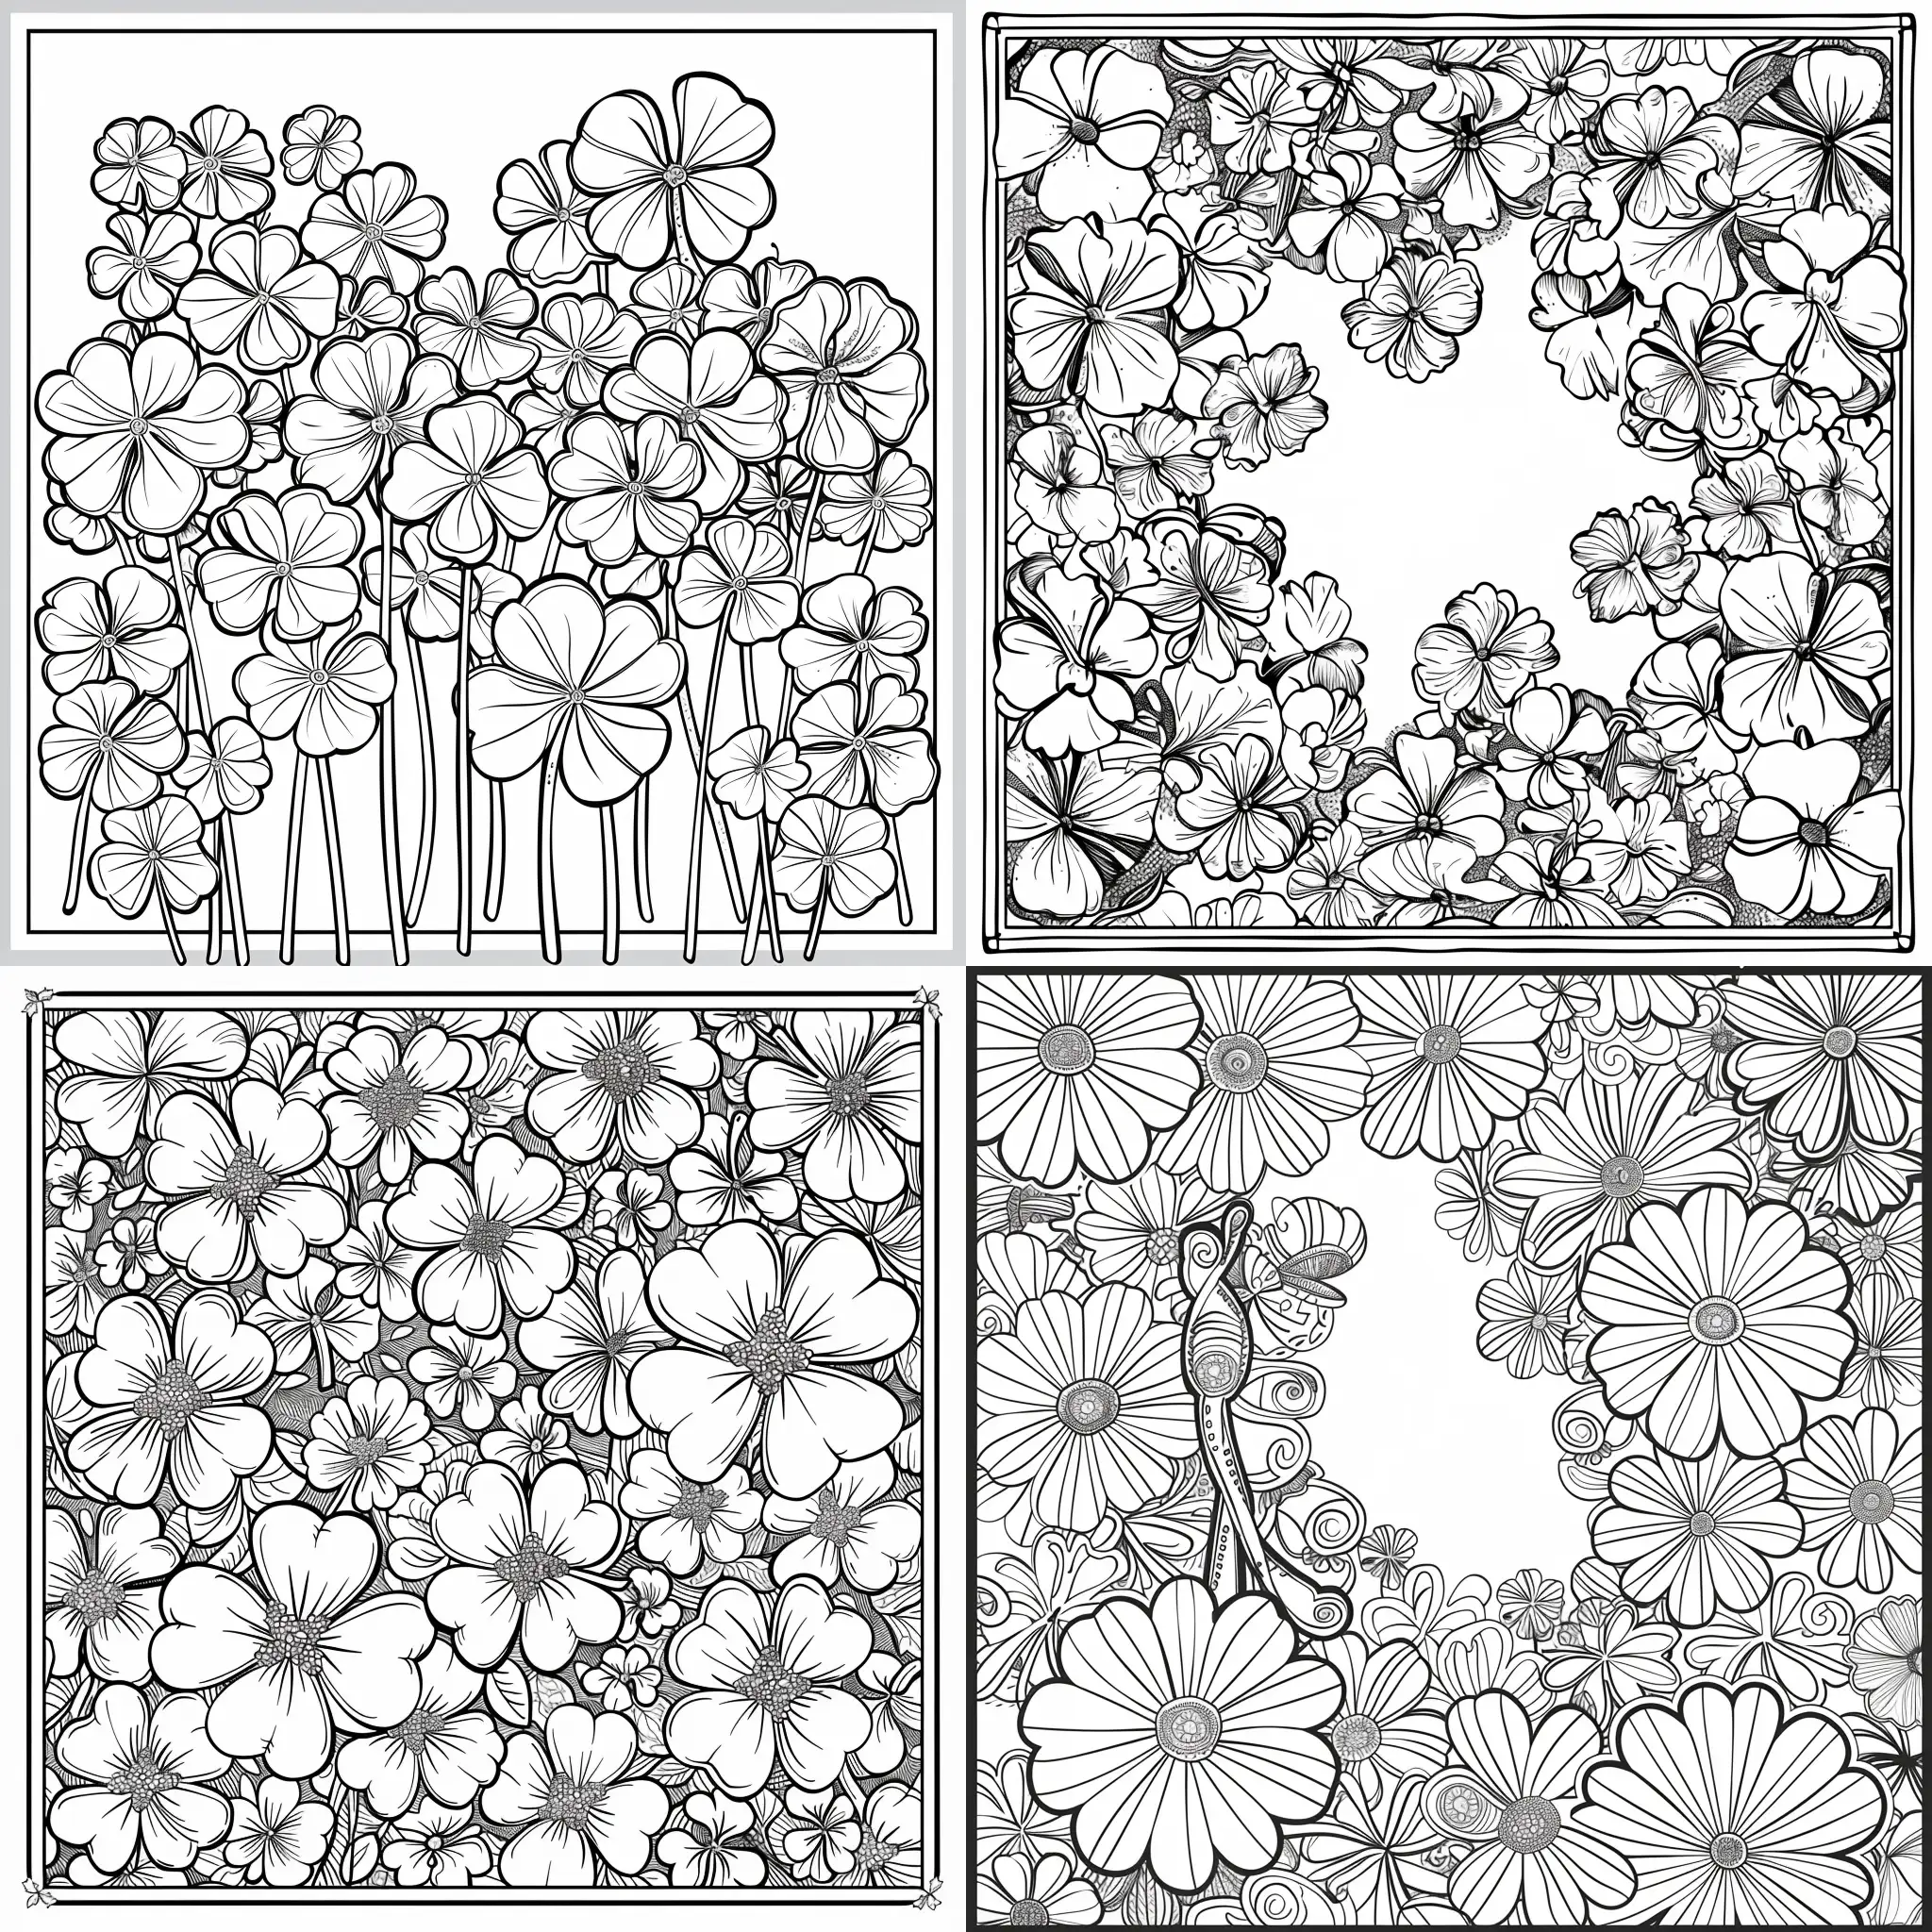 St-Patricks-Day-Coloring-Book-Page-for-Artistic-Inspiration